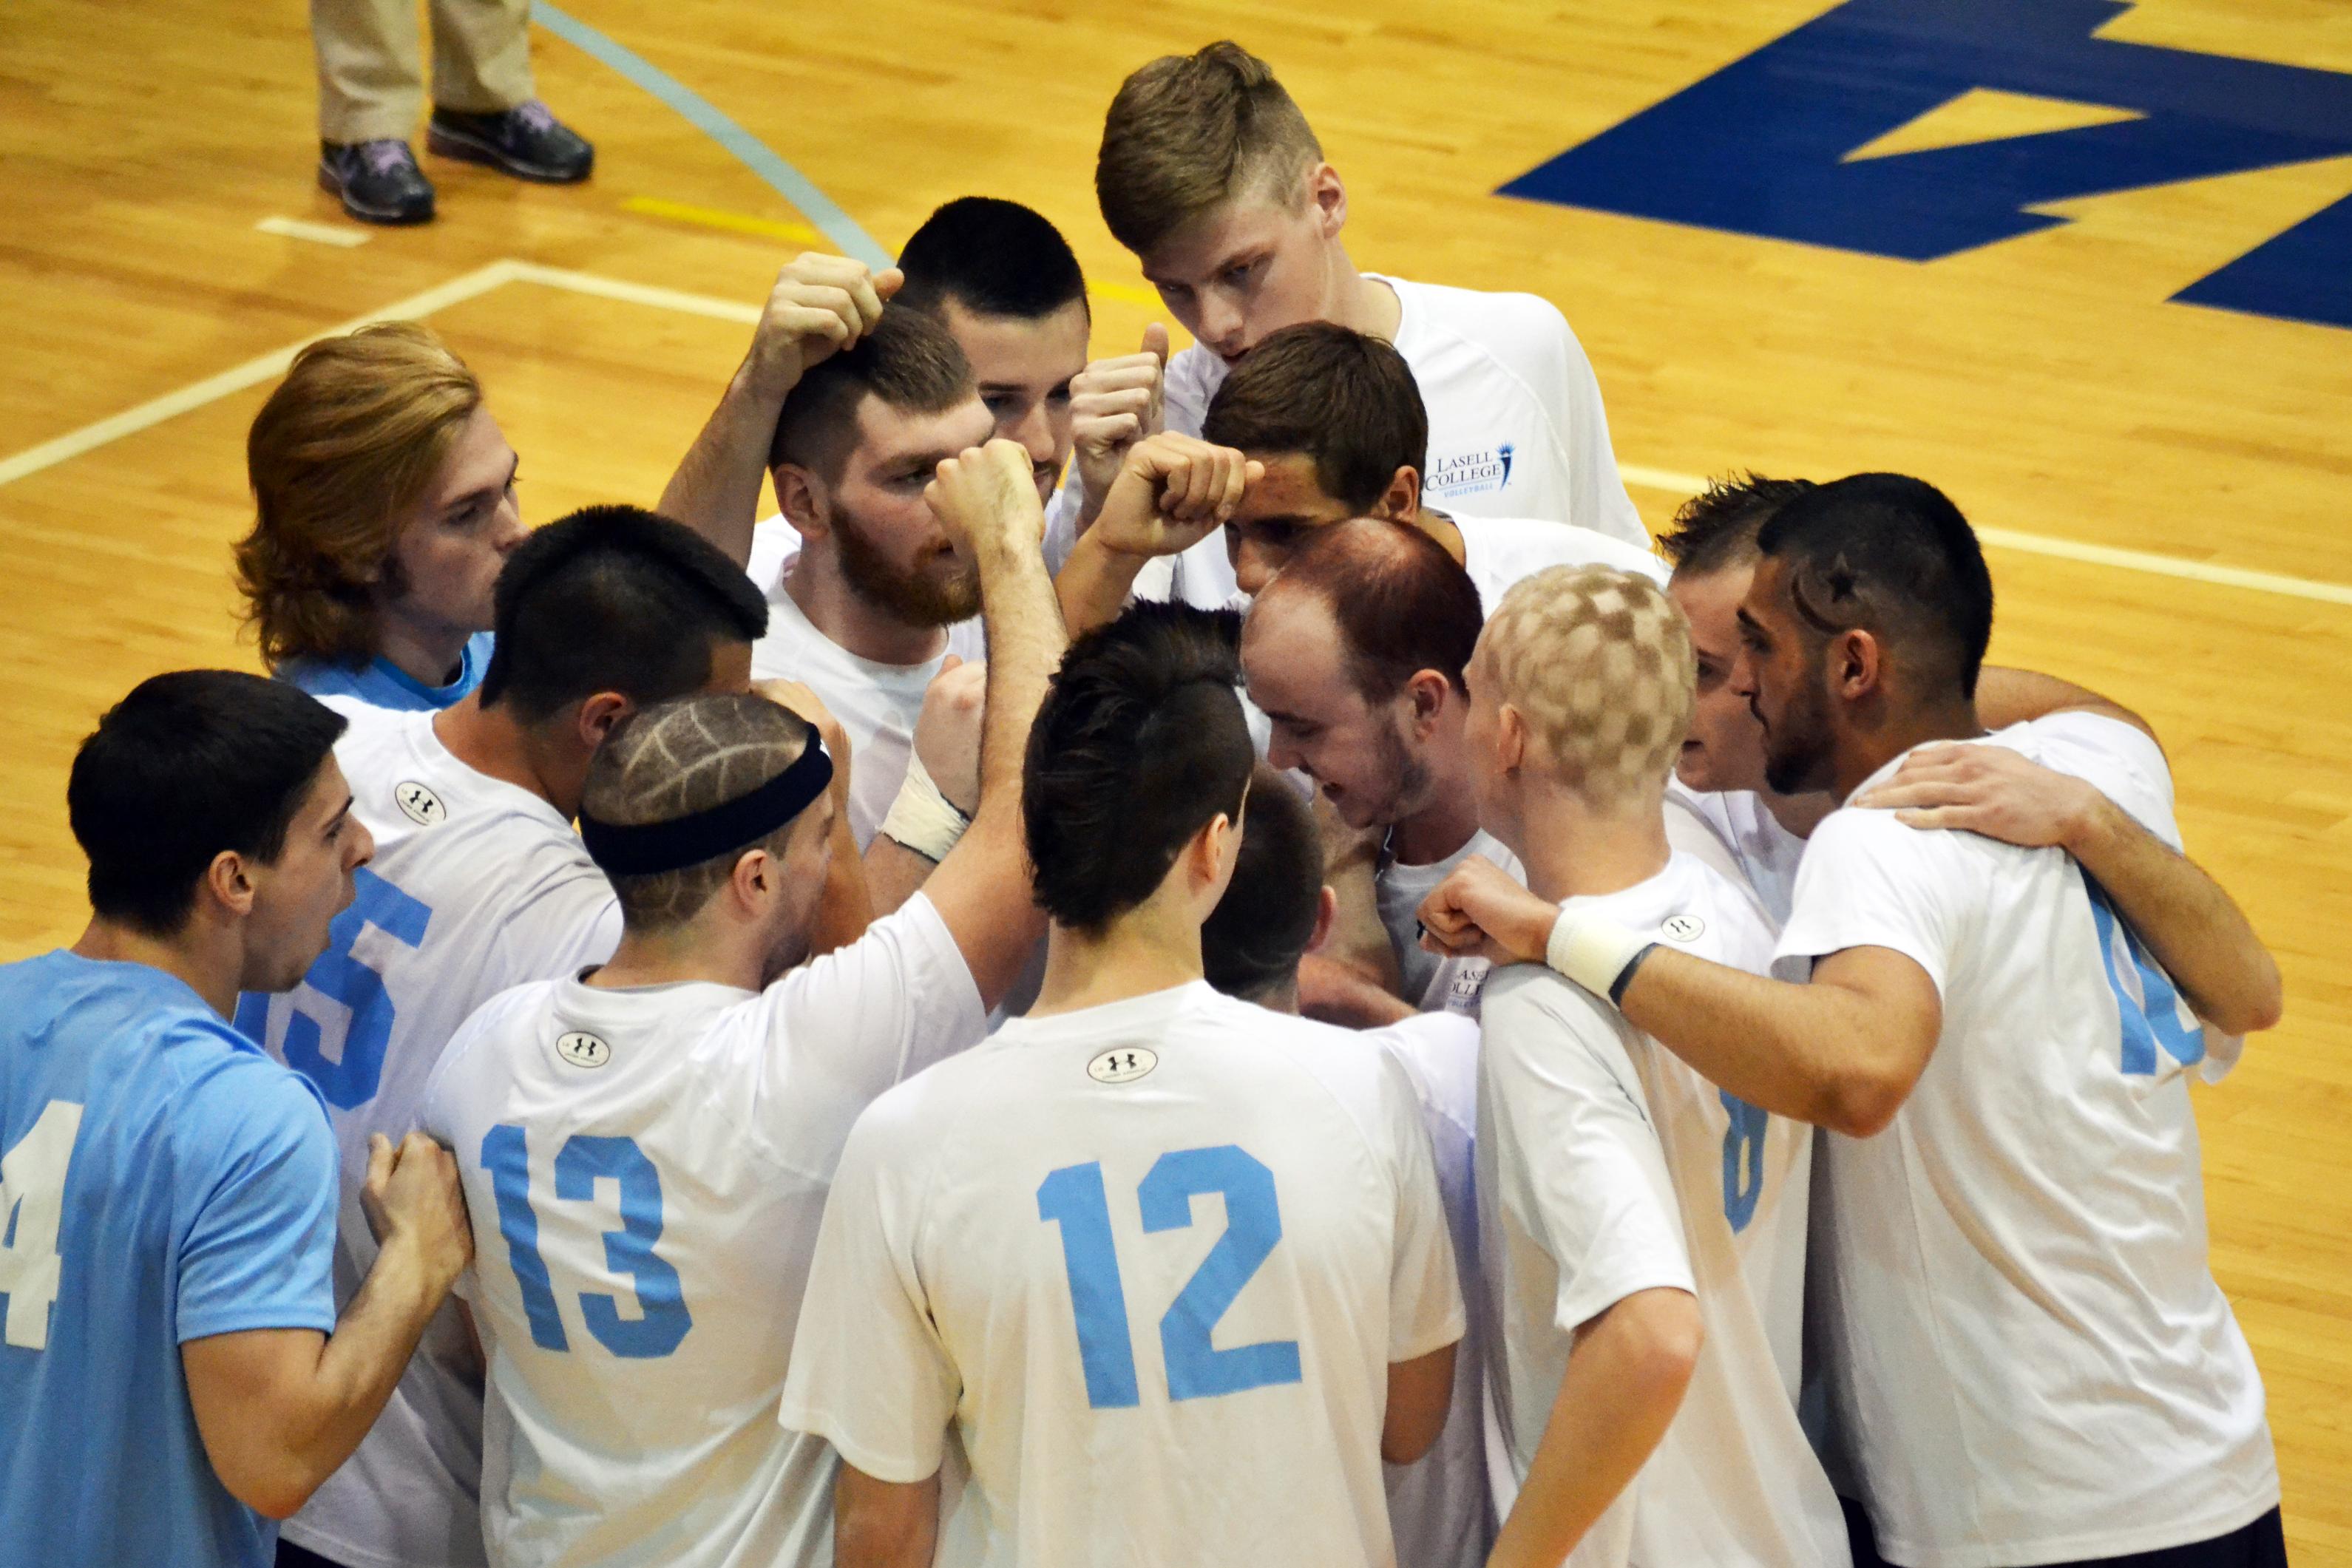 Men's Volleyball Wins All Four Matches at York College Invitational